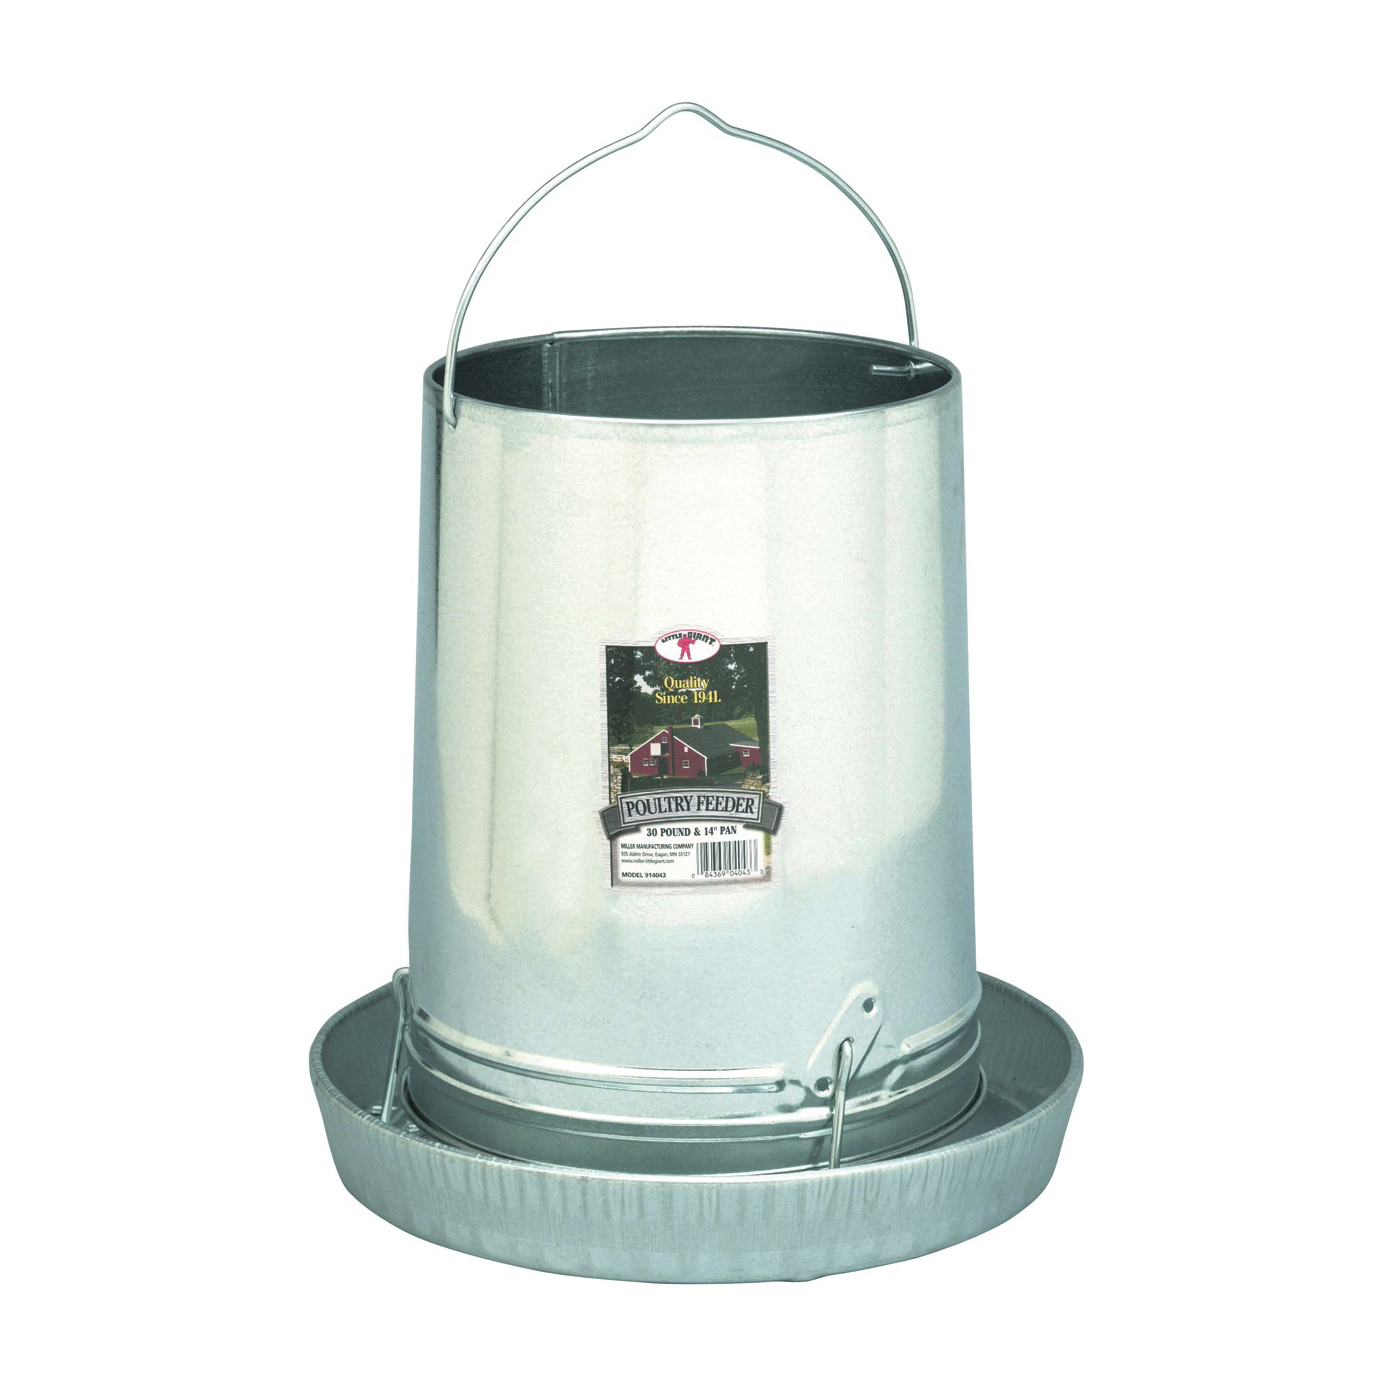 914043 Poultry Feeder, 30 lb Capacity, Rolled Edge, Galvanized Steel